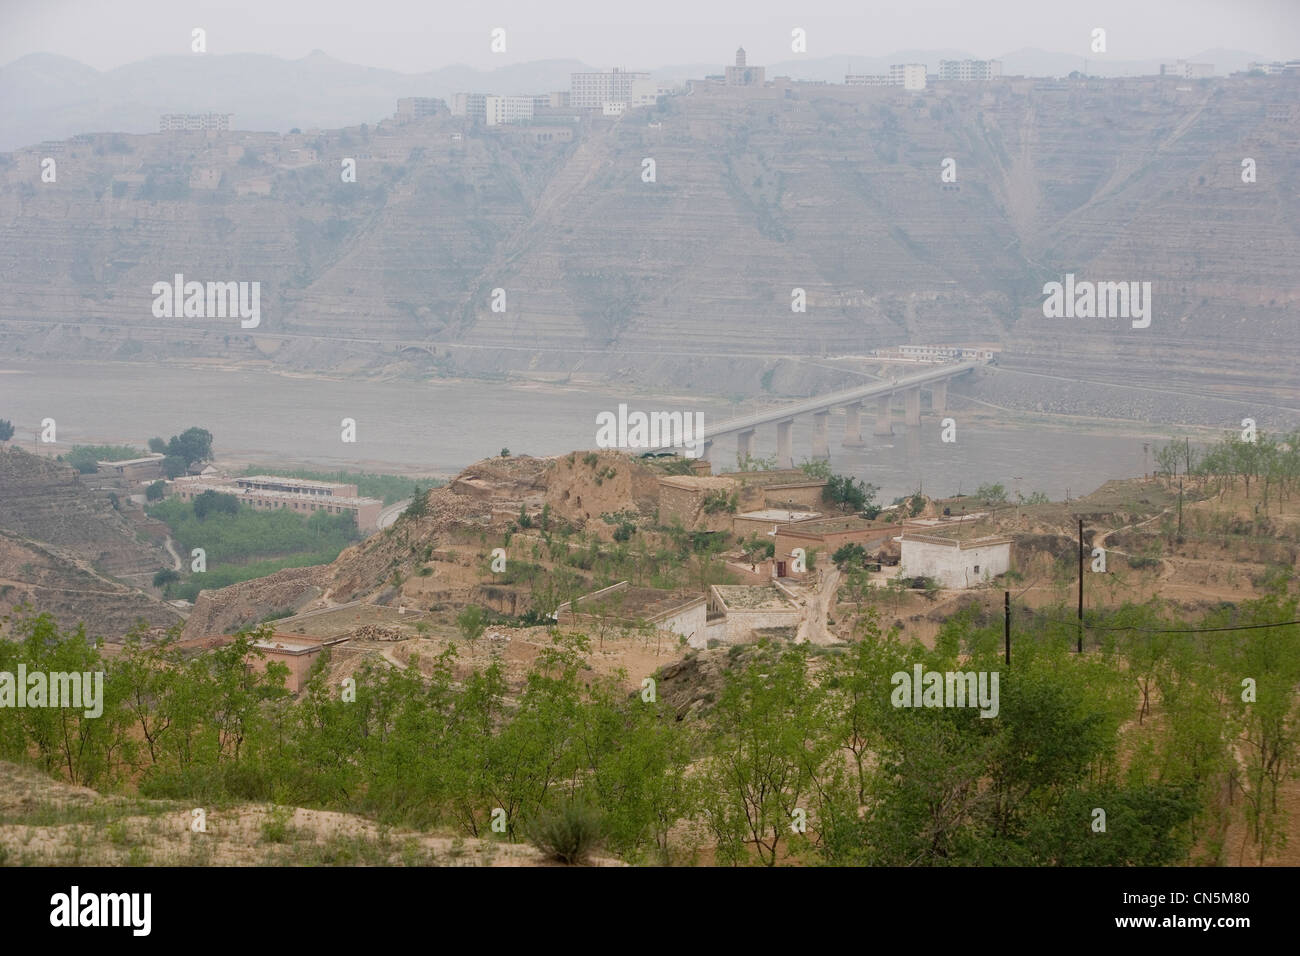 LINXIAN, HENAN PROVINCE, CHINA - JUNE 2006: Pollution obscures the view across the river. Stock Photo